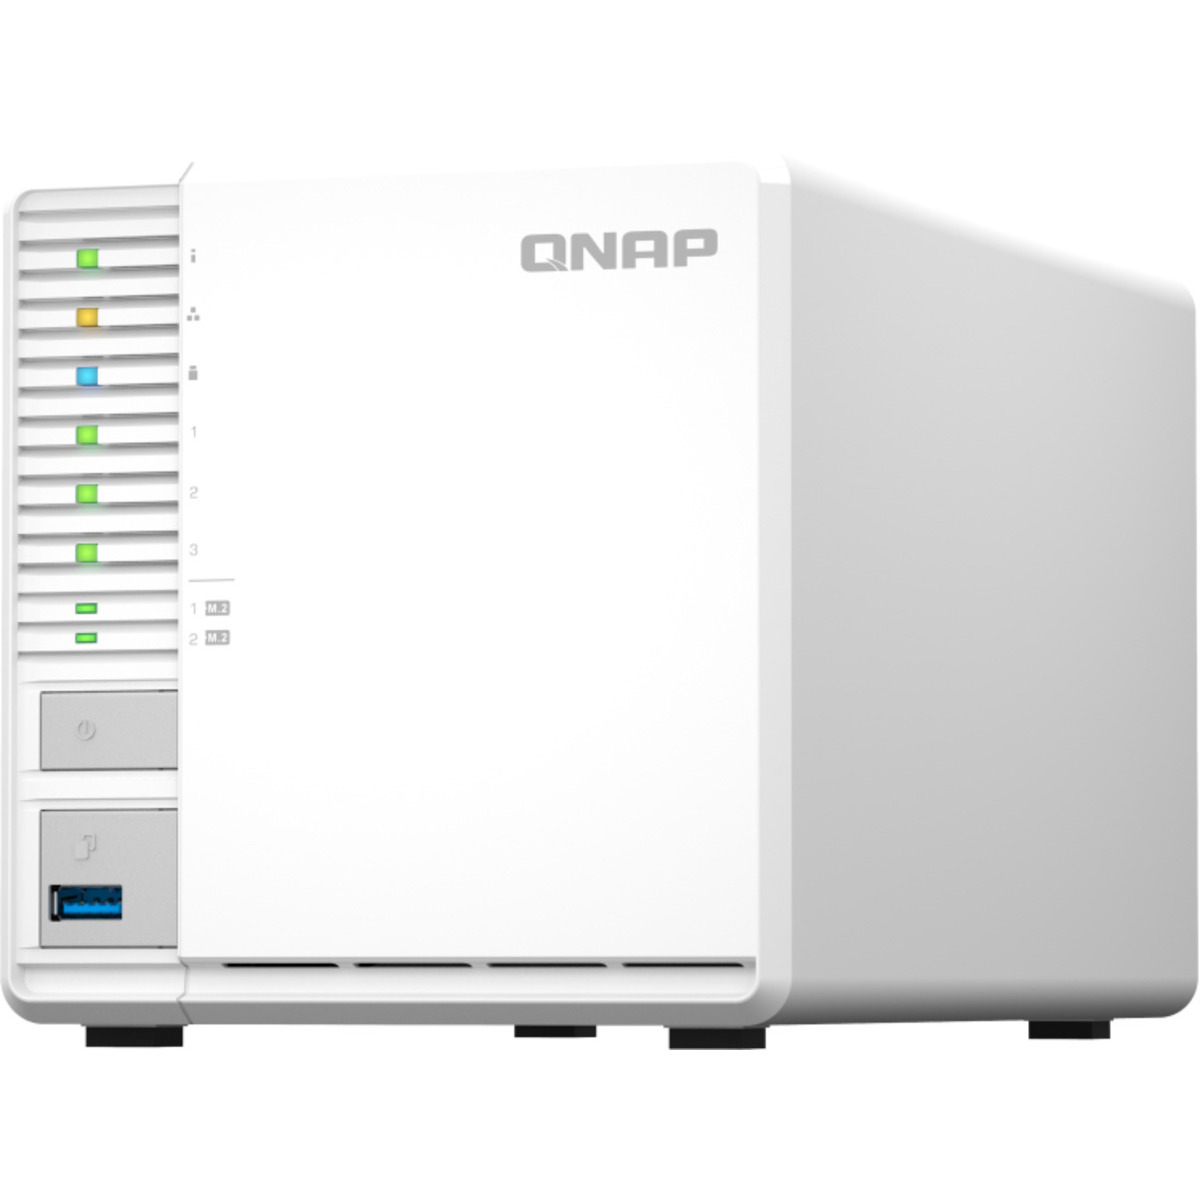 buy QNAP TS-364 Desktop NAS - Network Attached Storage Device Burn-In Tested Configurations - nas headquarters buy network attached storage server device das new raid-5 free shipping usa TS-364